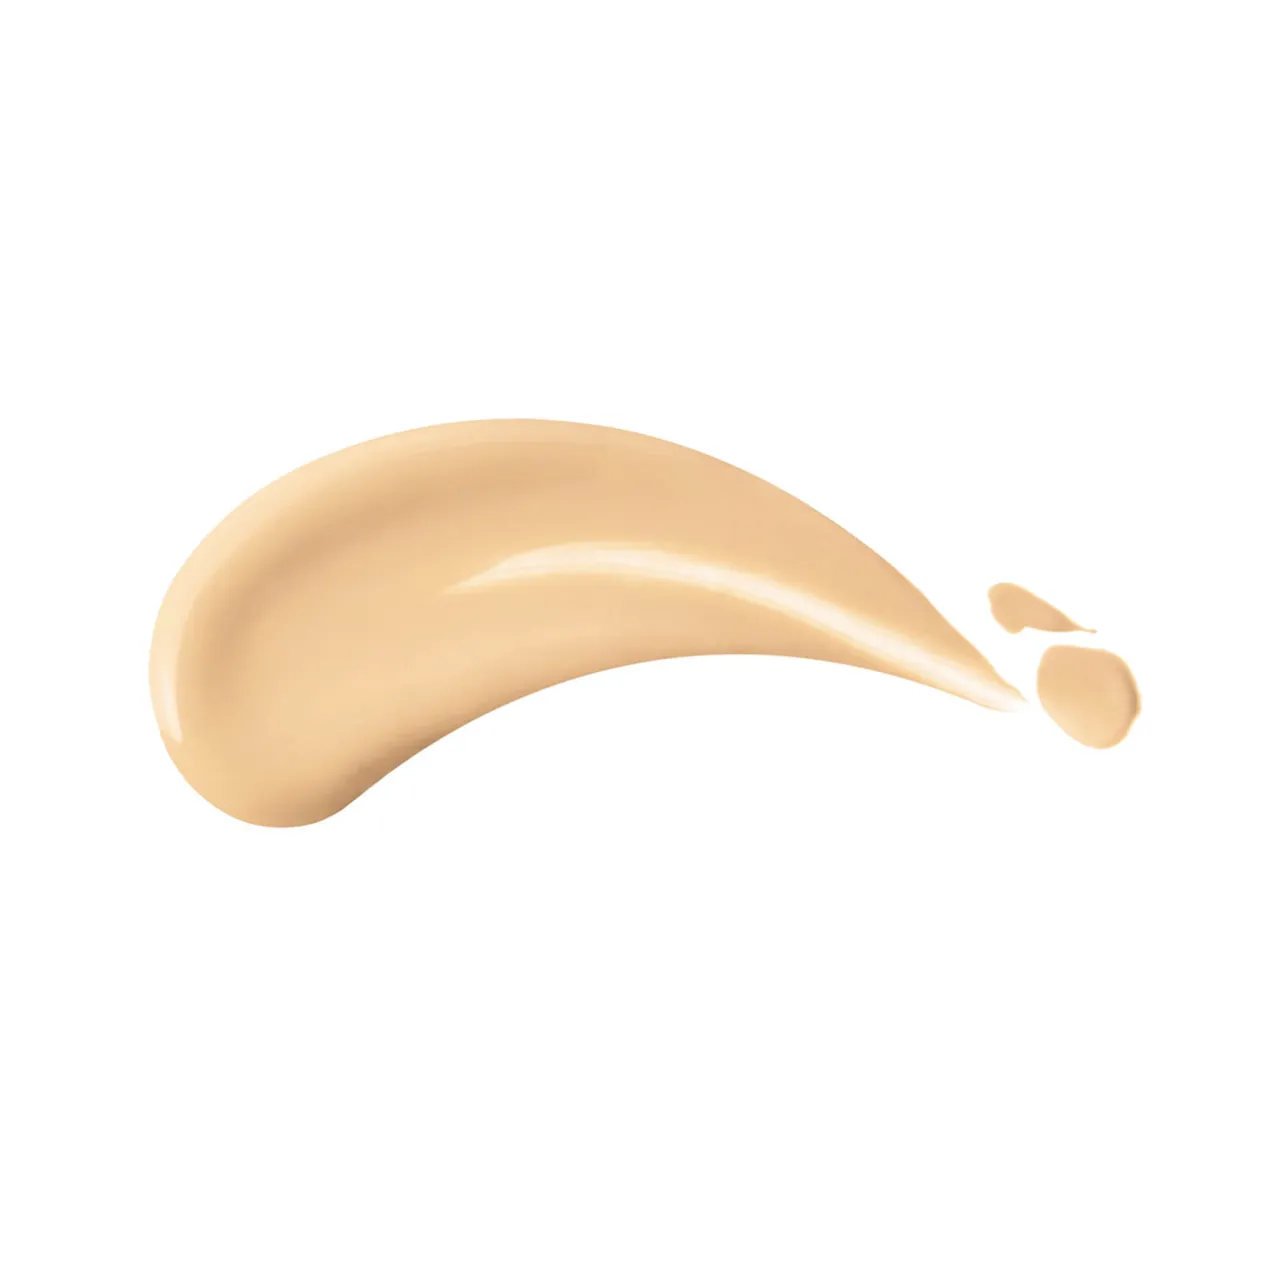 Shiseido Revitalessence Glow Foundation Exclusive 30ml (Various Shades) - 160 Shell